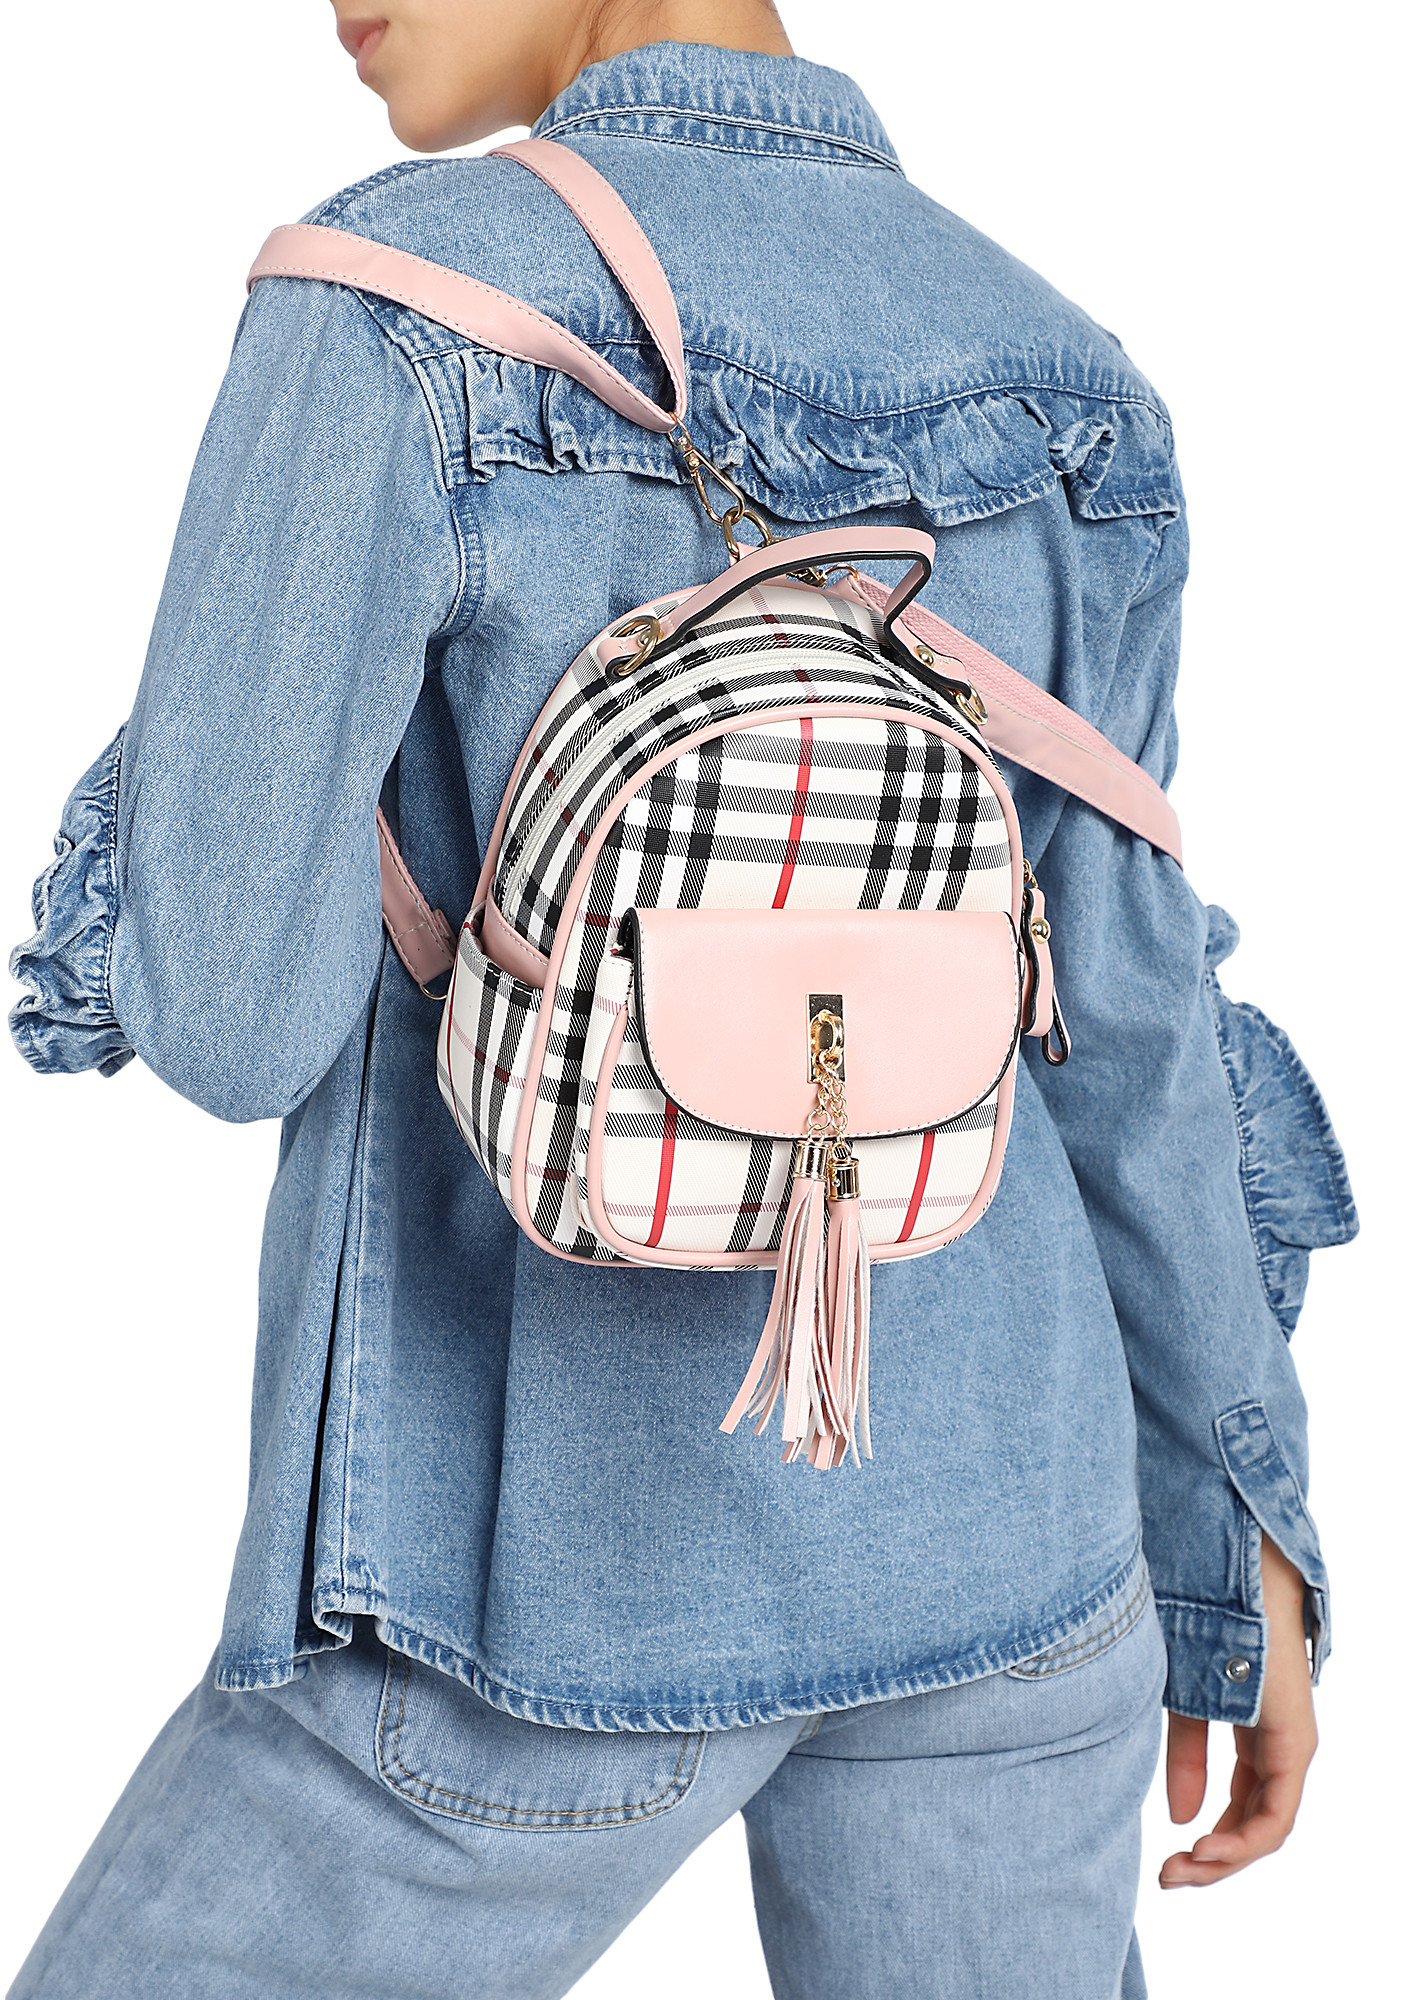 OLD CHECK DAYS PINK BACKPACK